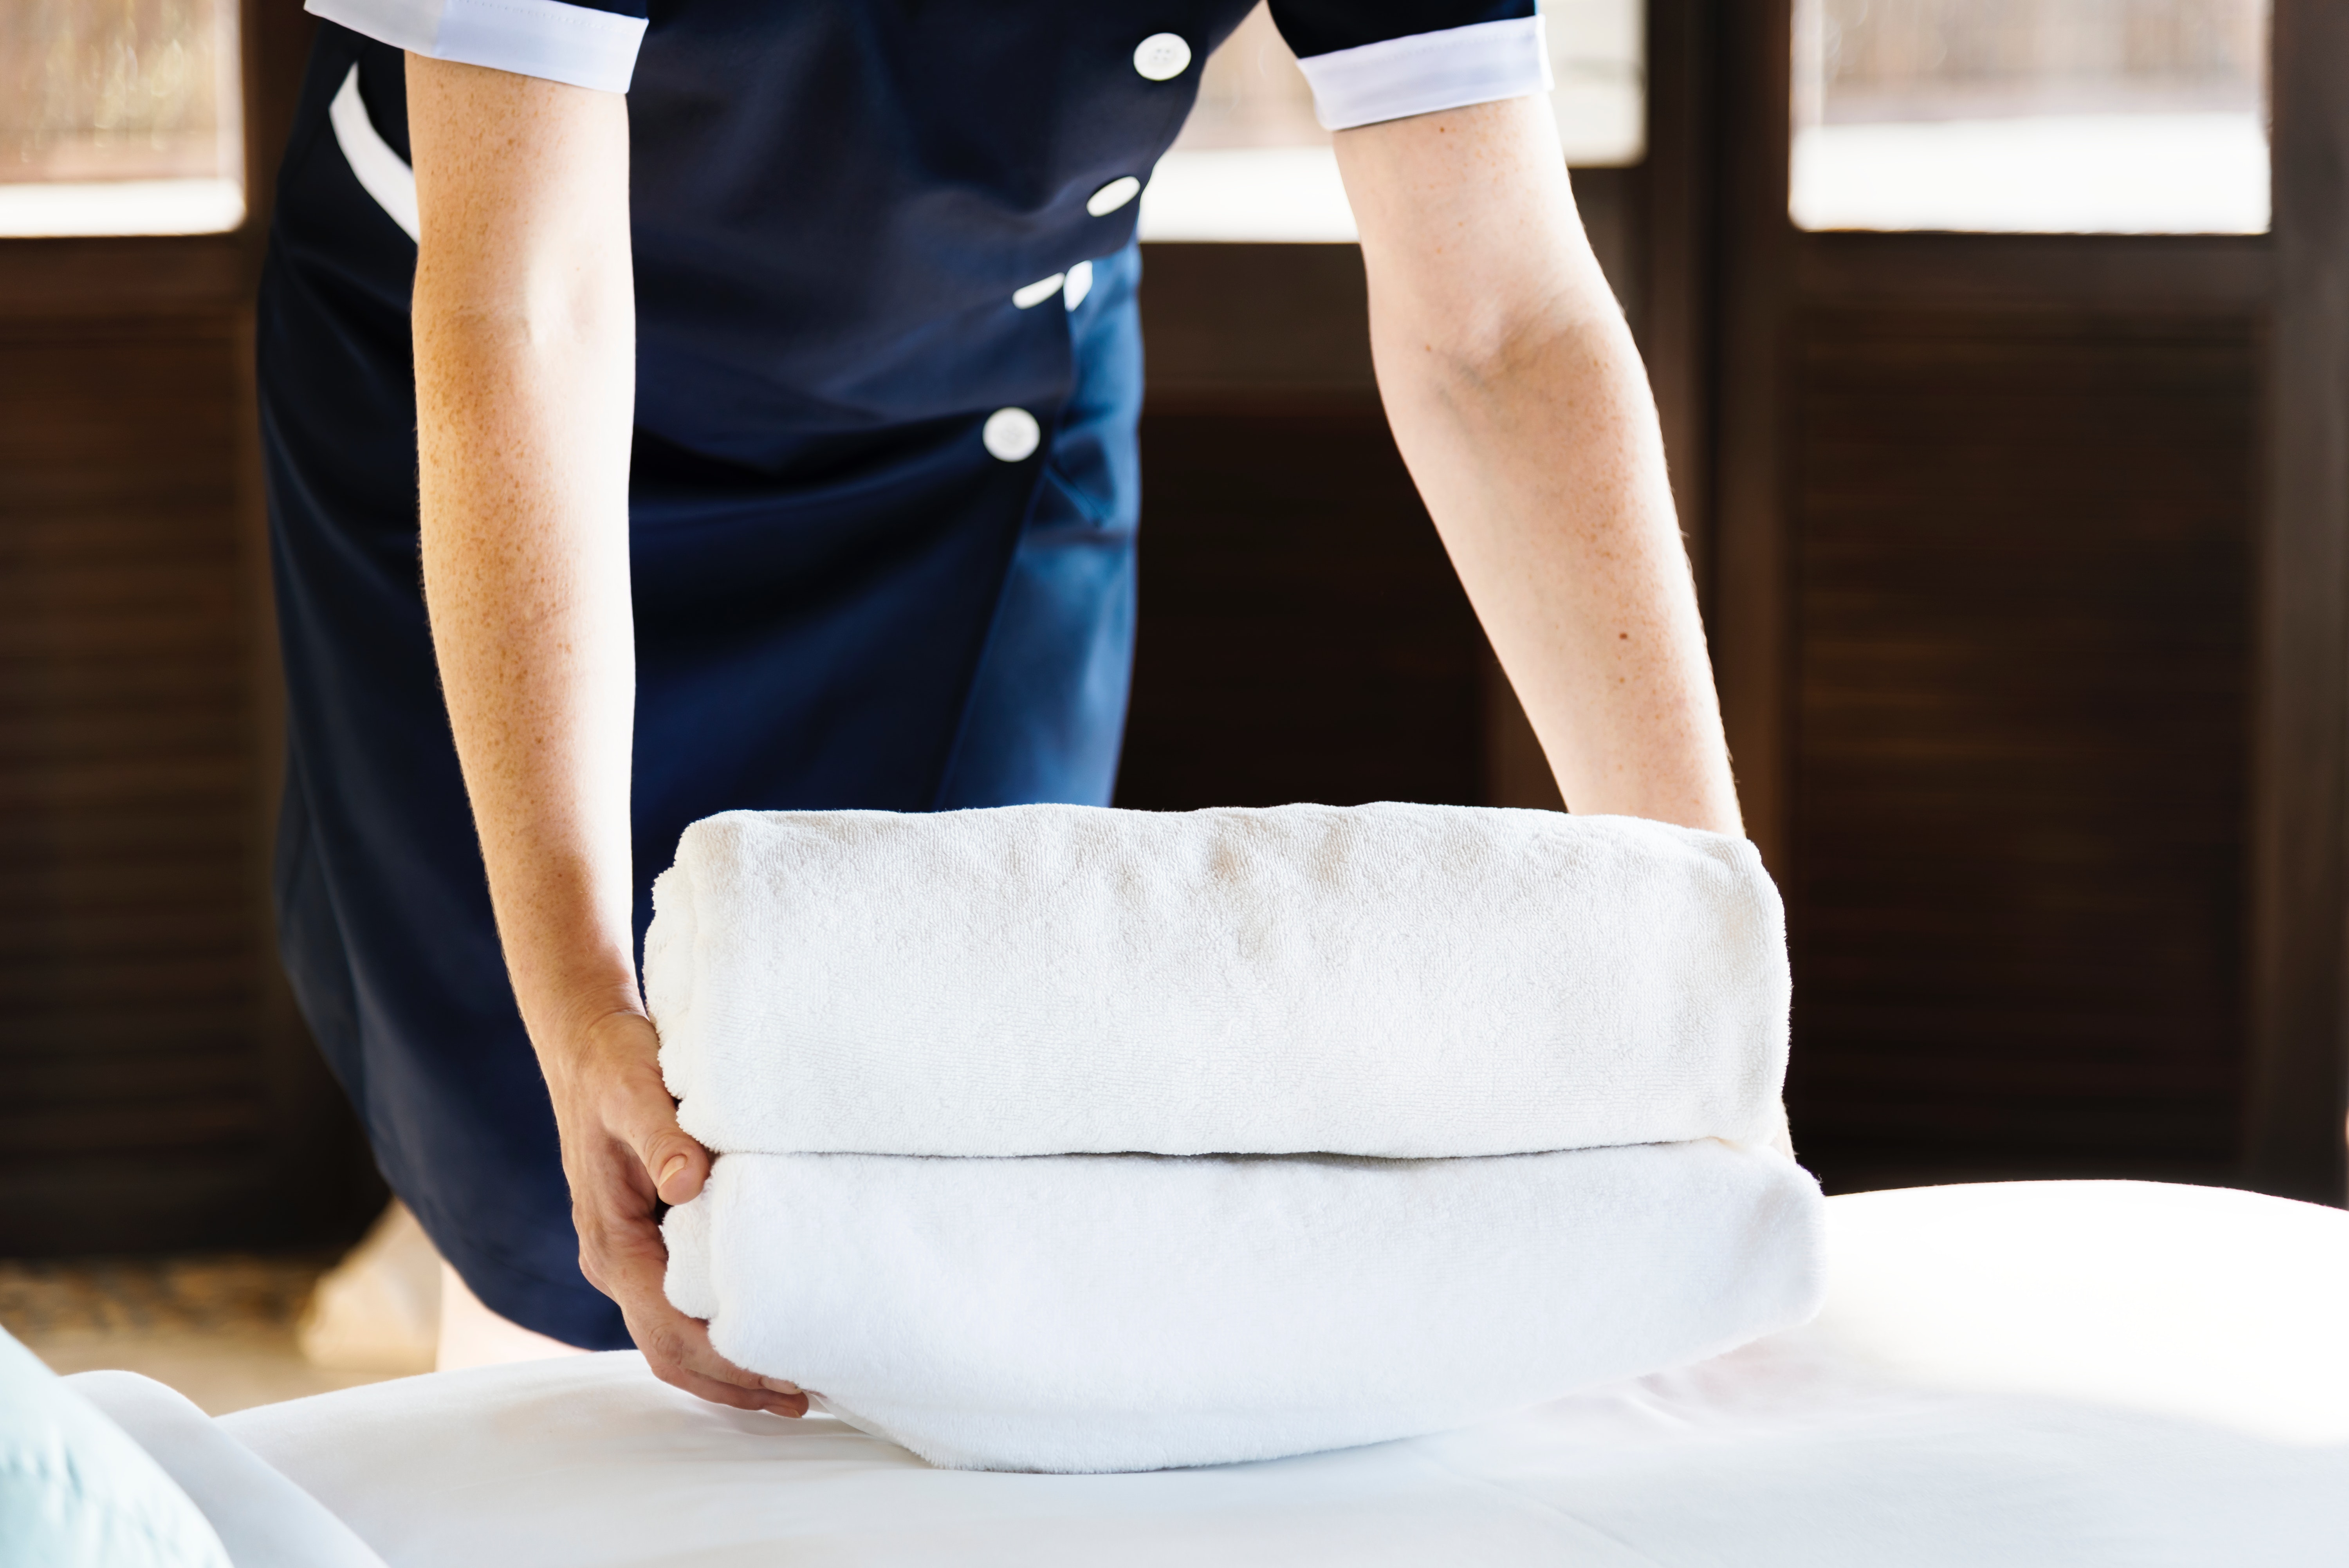 A person in housekeeping uniform is folded towels on a pressed bed